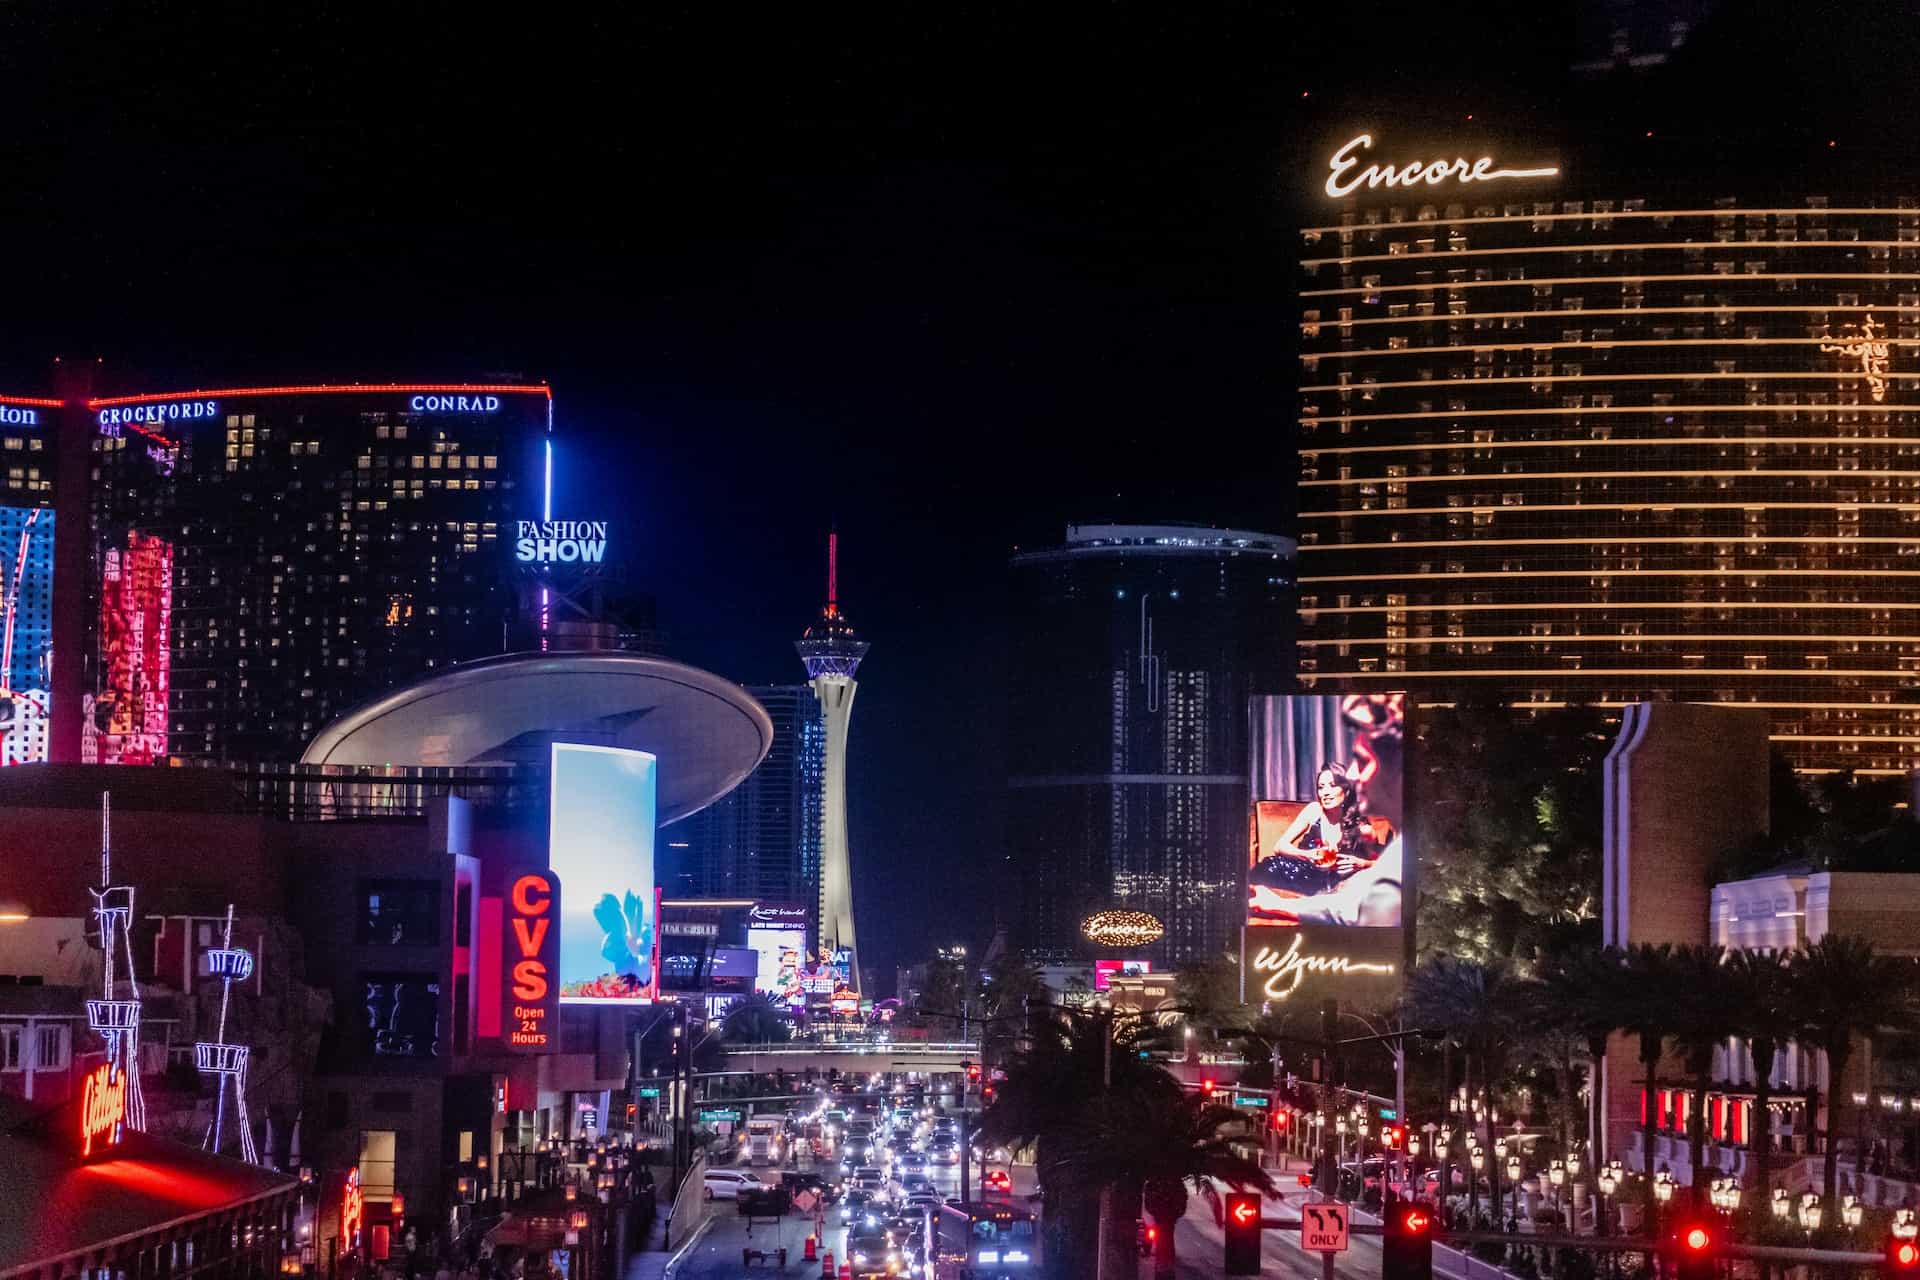 The world-famous strip in downtown Las Vegas, Nevada, featuring numerous casino and hotel complexes and endless neon lights.